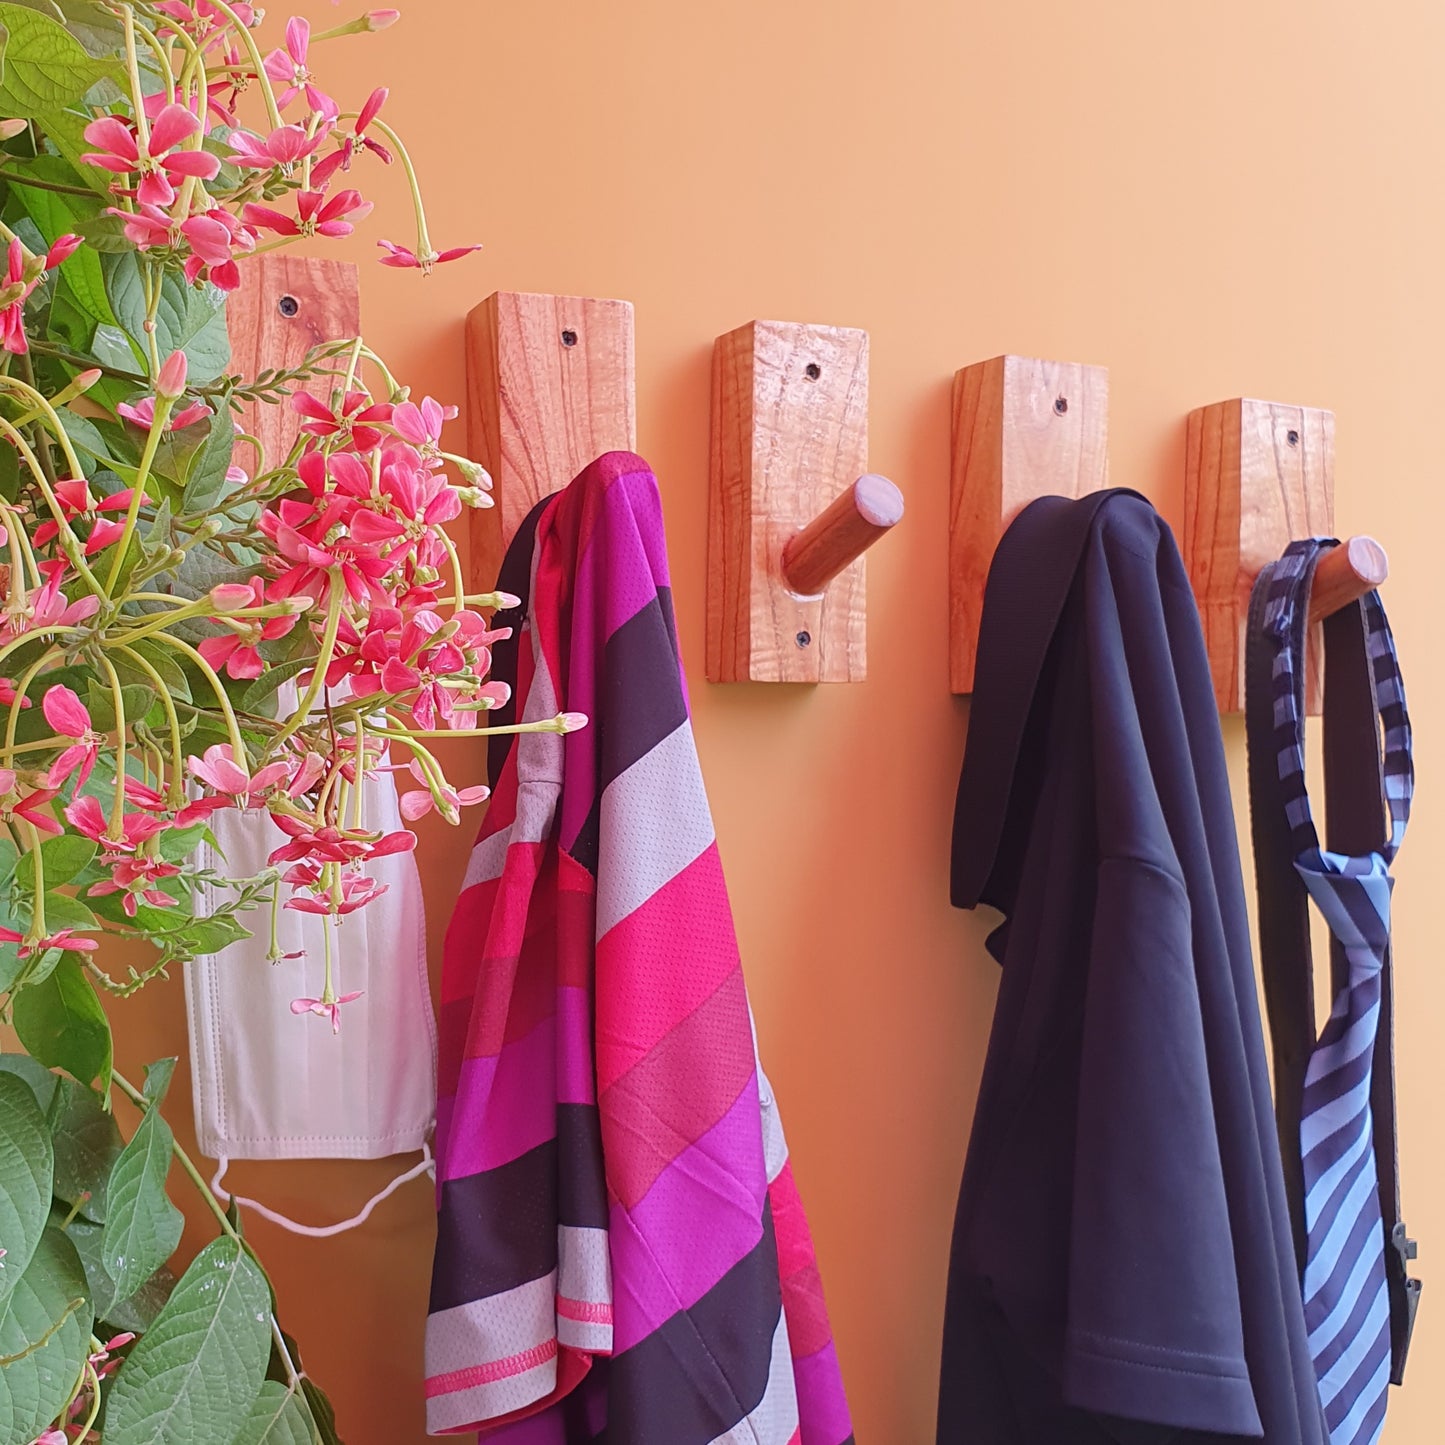 Wooden Hanging Hooks (4Pieces)